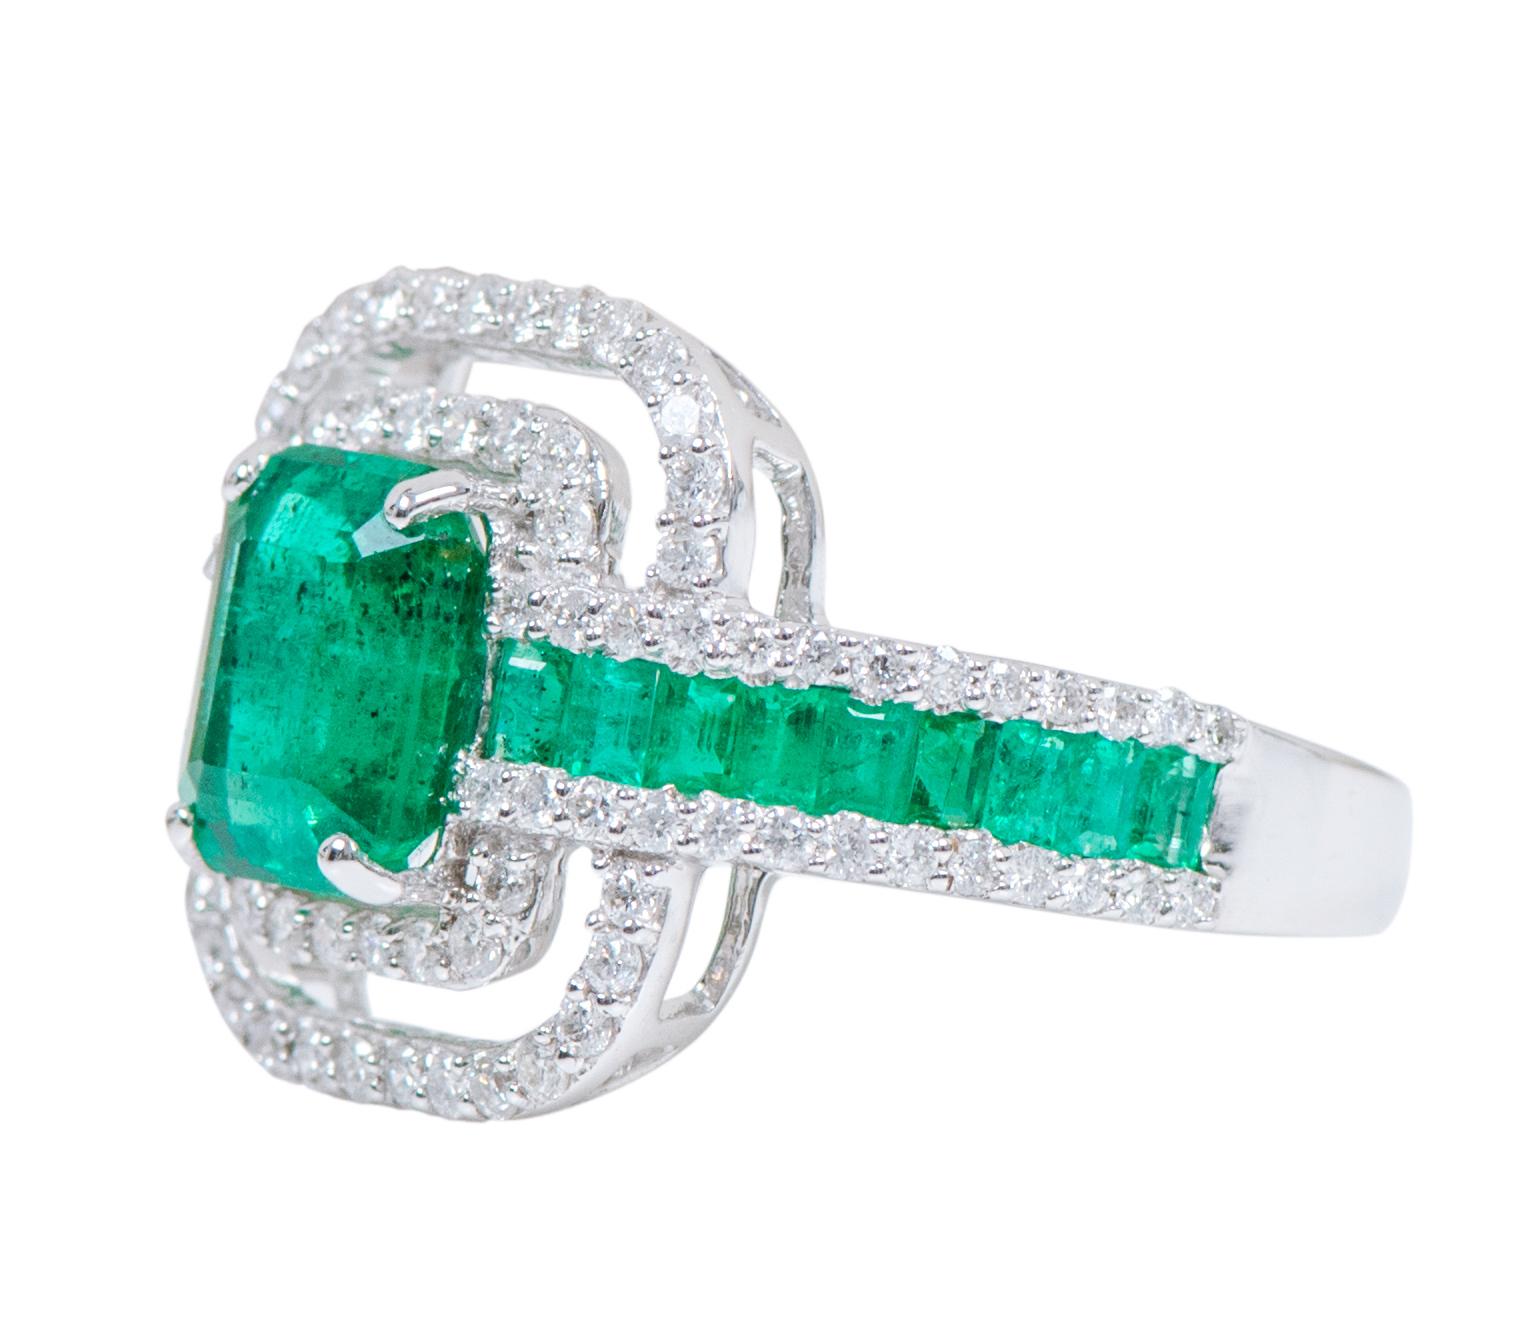 18 Karat White Gold 3.41 Carat Natural Emerald and Diamond Solitaire Cluster Band Ring

This magnificent vibrant green emerald and diamond double cluster art-deco contemporary ring is fabulous. The solitaire emerald cut emerald in eagle claw setting